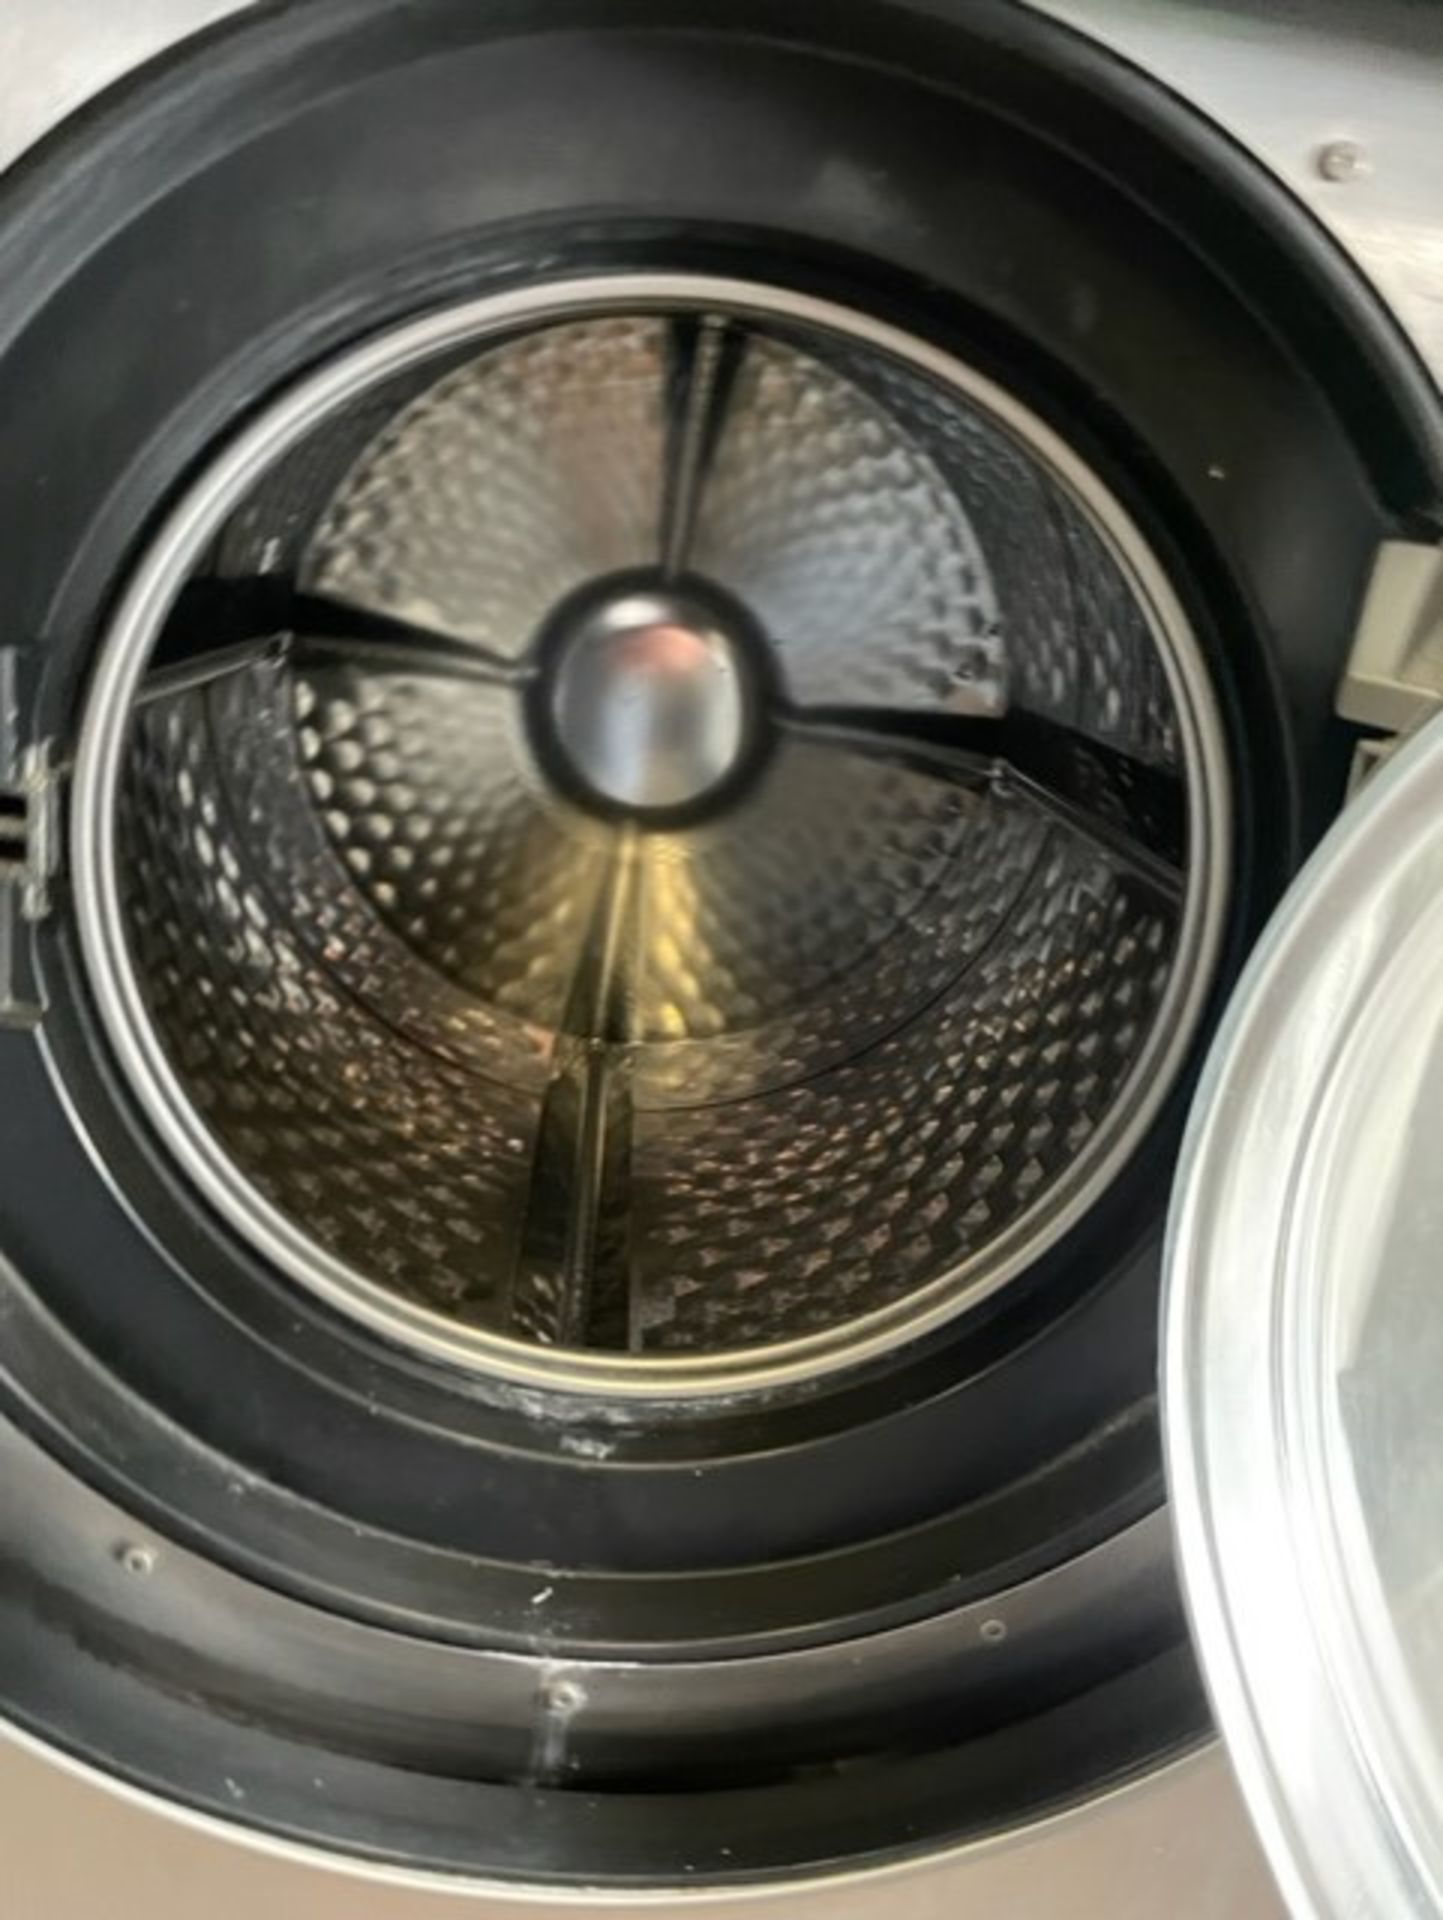 Miele washing machine 3 phase commercial it’s a pw008 and is in very good condition it has a 17kw - Image 5 of 7